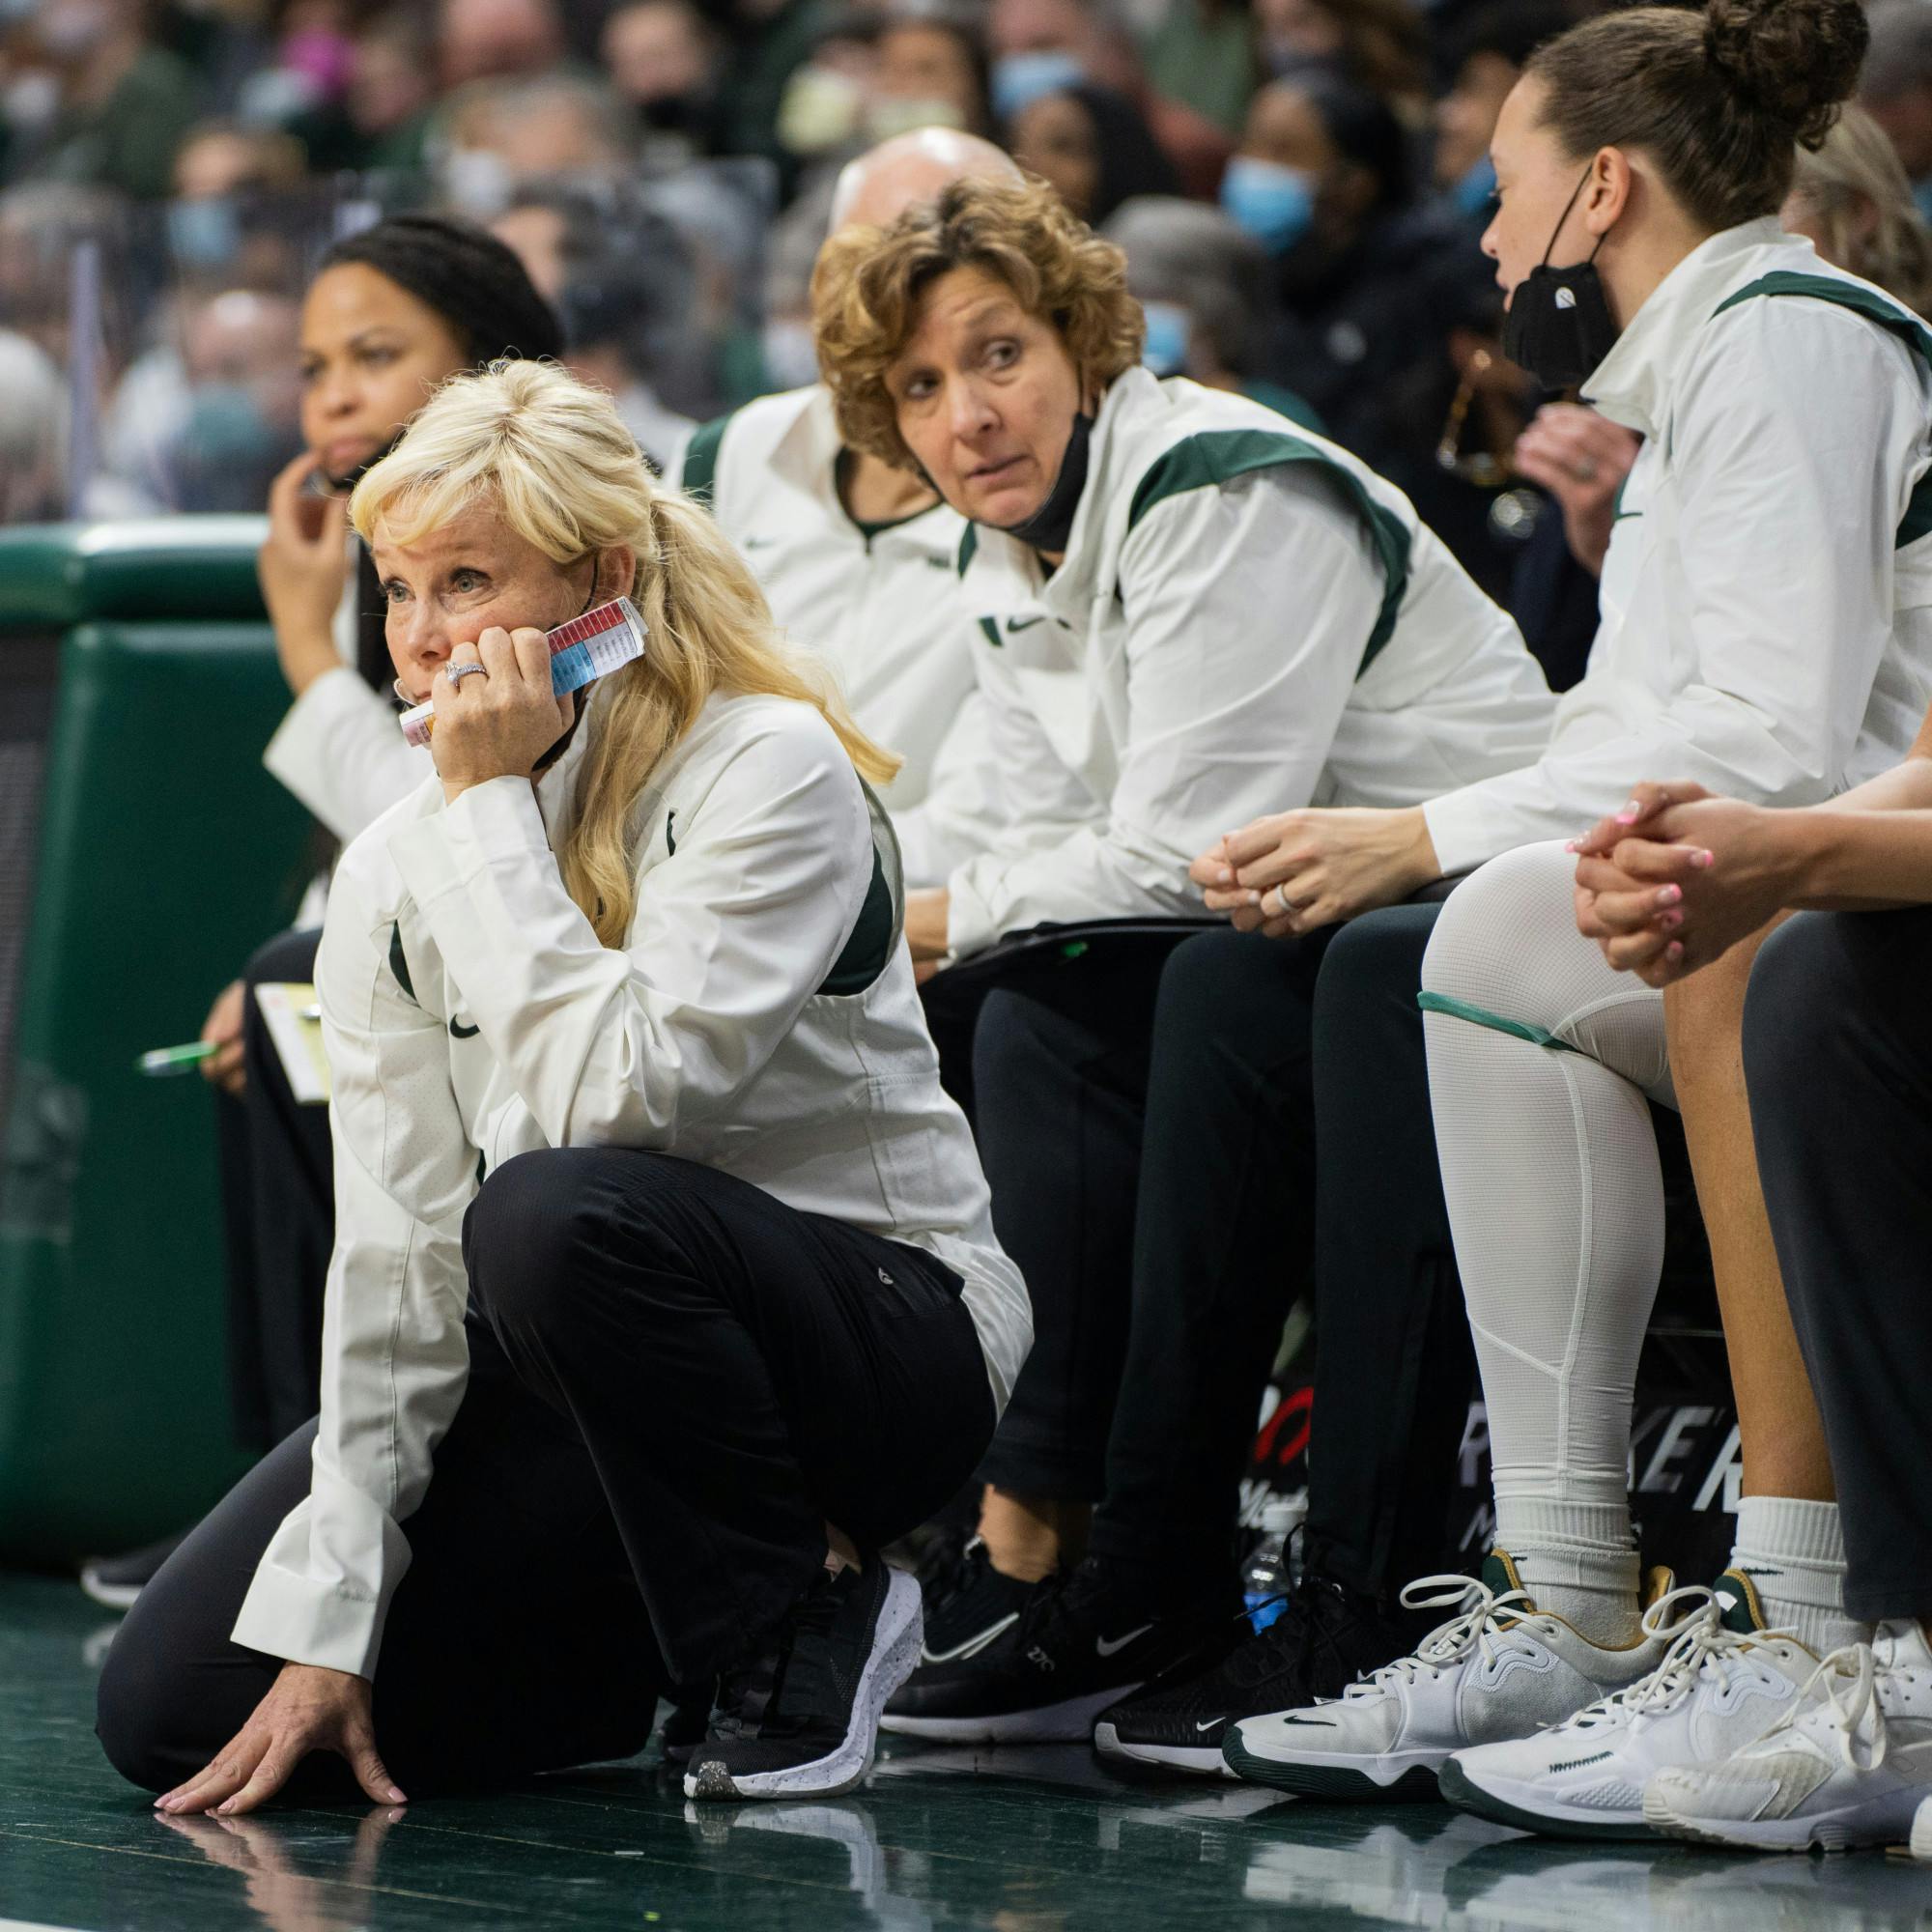 <p>Head women's basketball coach Suzy Merchant watches as her players take on the Buckeyes. The Spartans lost 61-55 against Ohio State University at the Breslin Center on Feb. 27, 2022.</p>